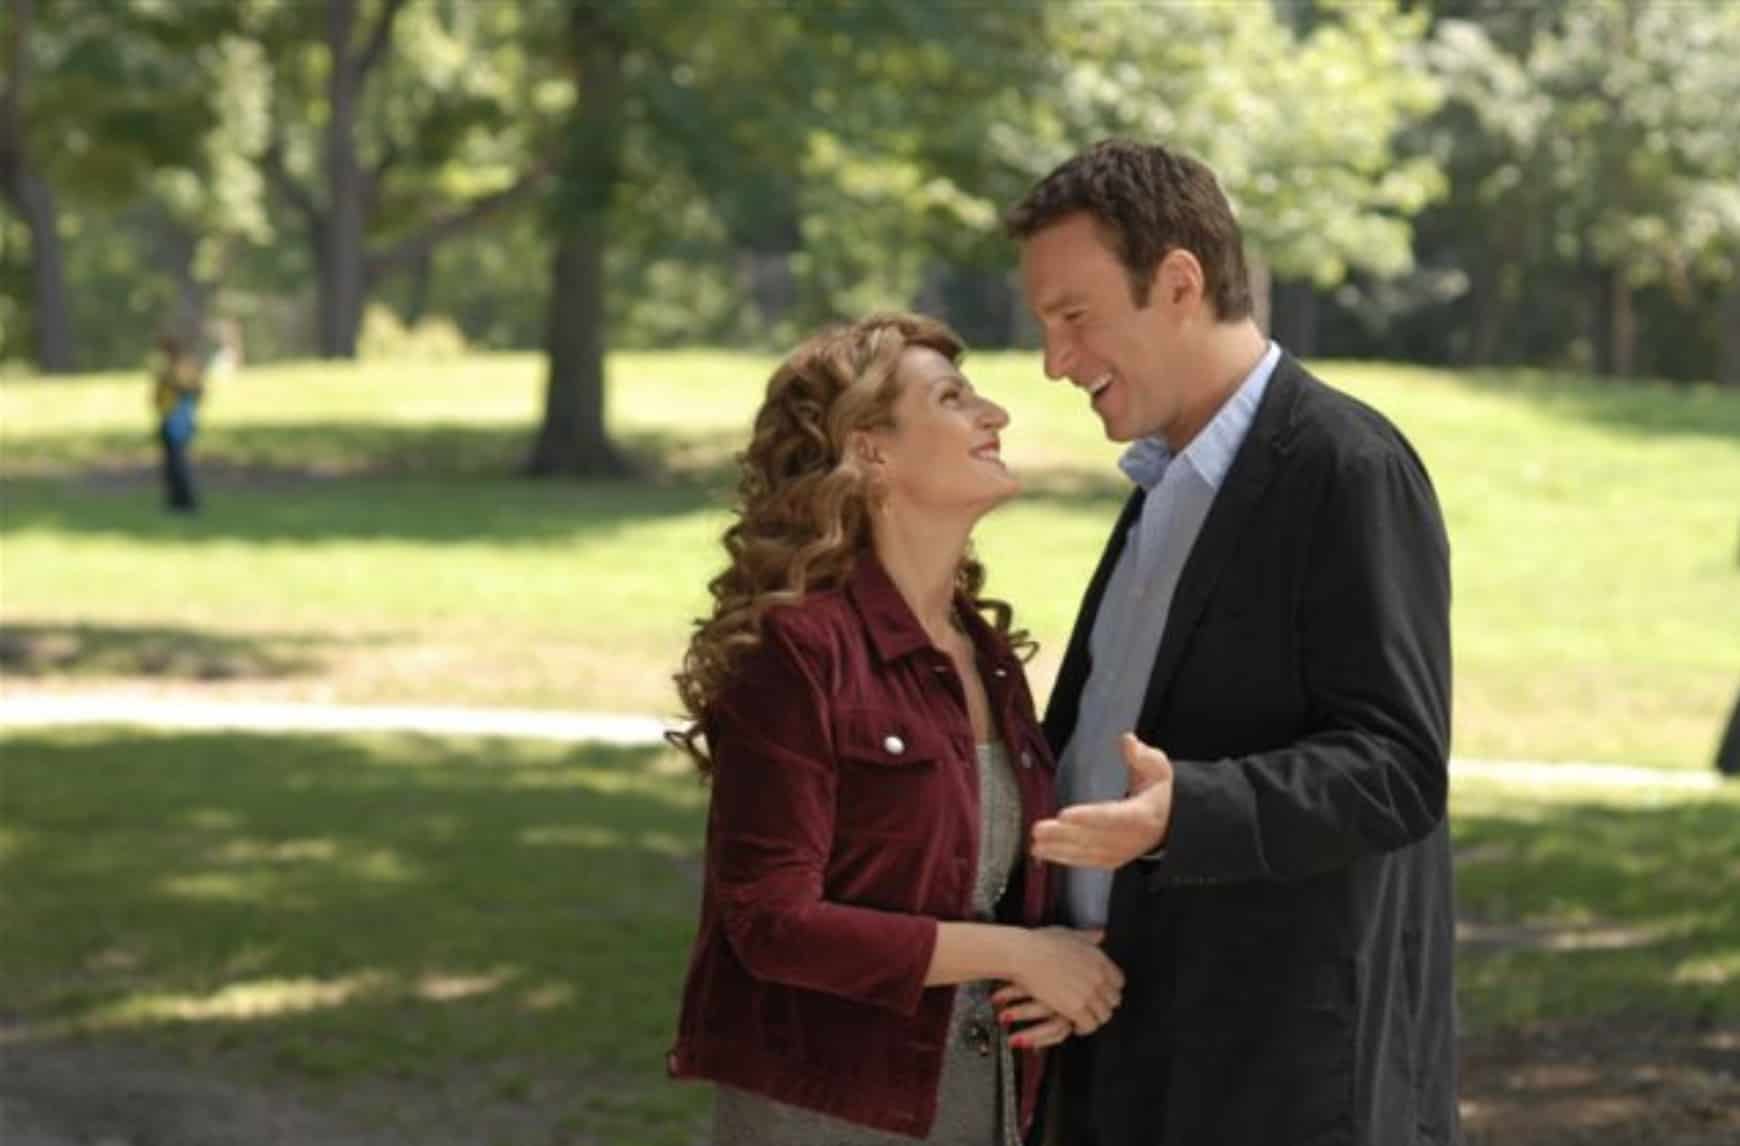 A white couple standing in a park and smiling at each other in this image from Amazon Prime Video